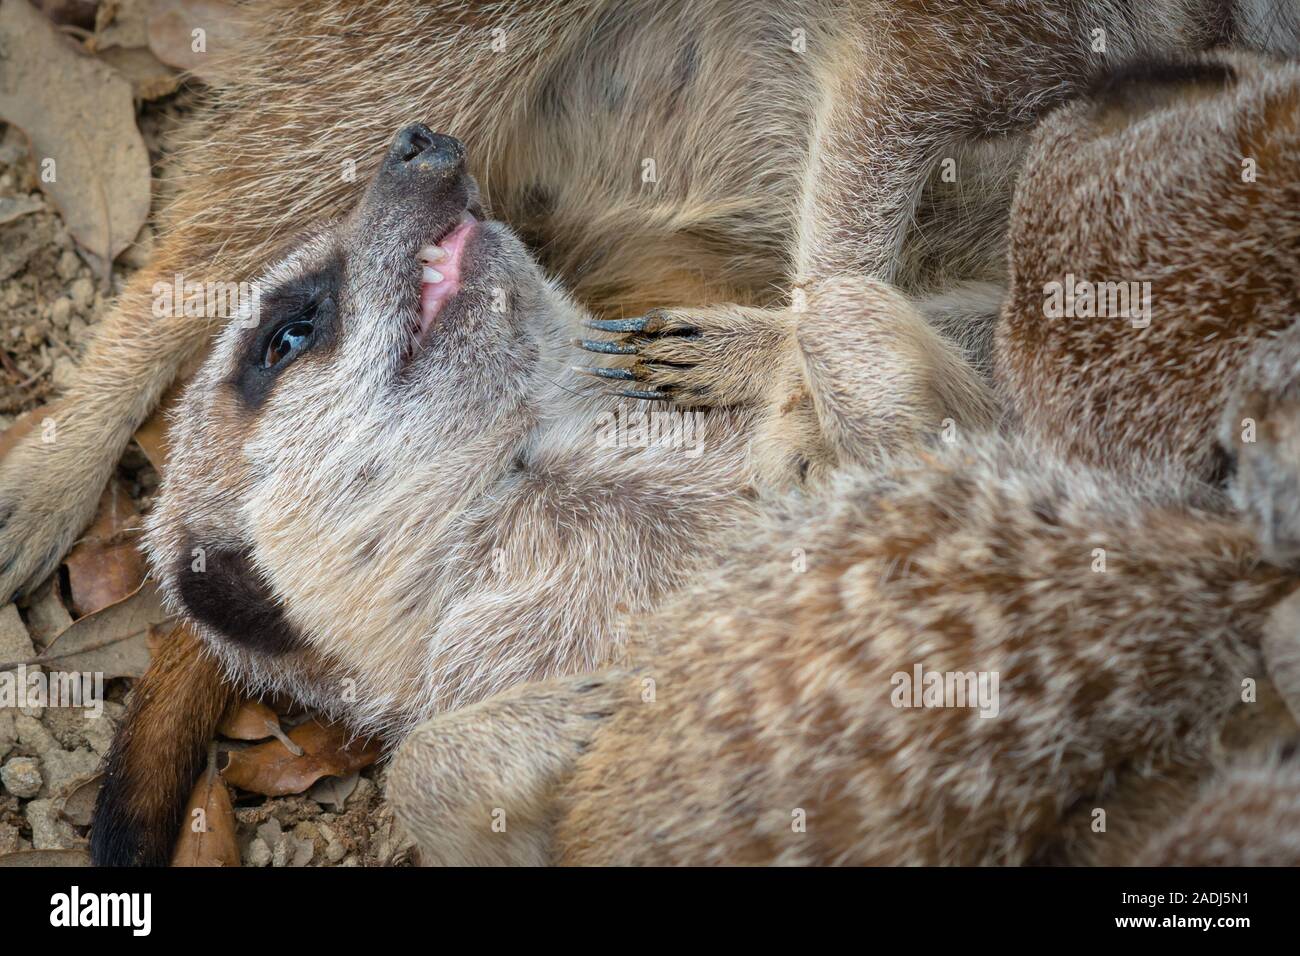 A meerkat lying down in a huddle showing sharp teeth and claws Stock Photo